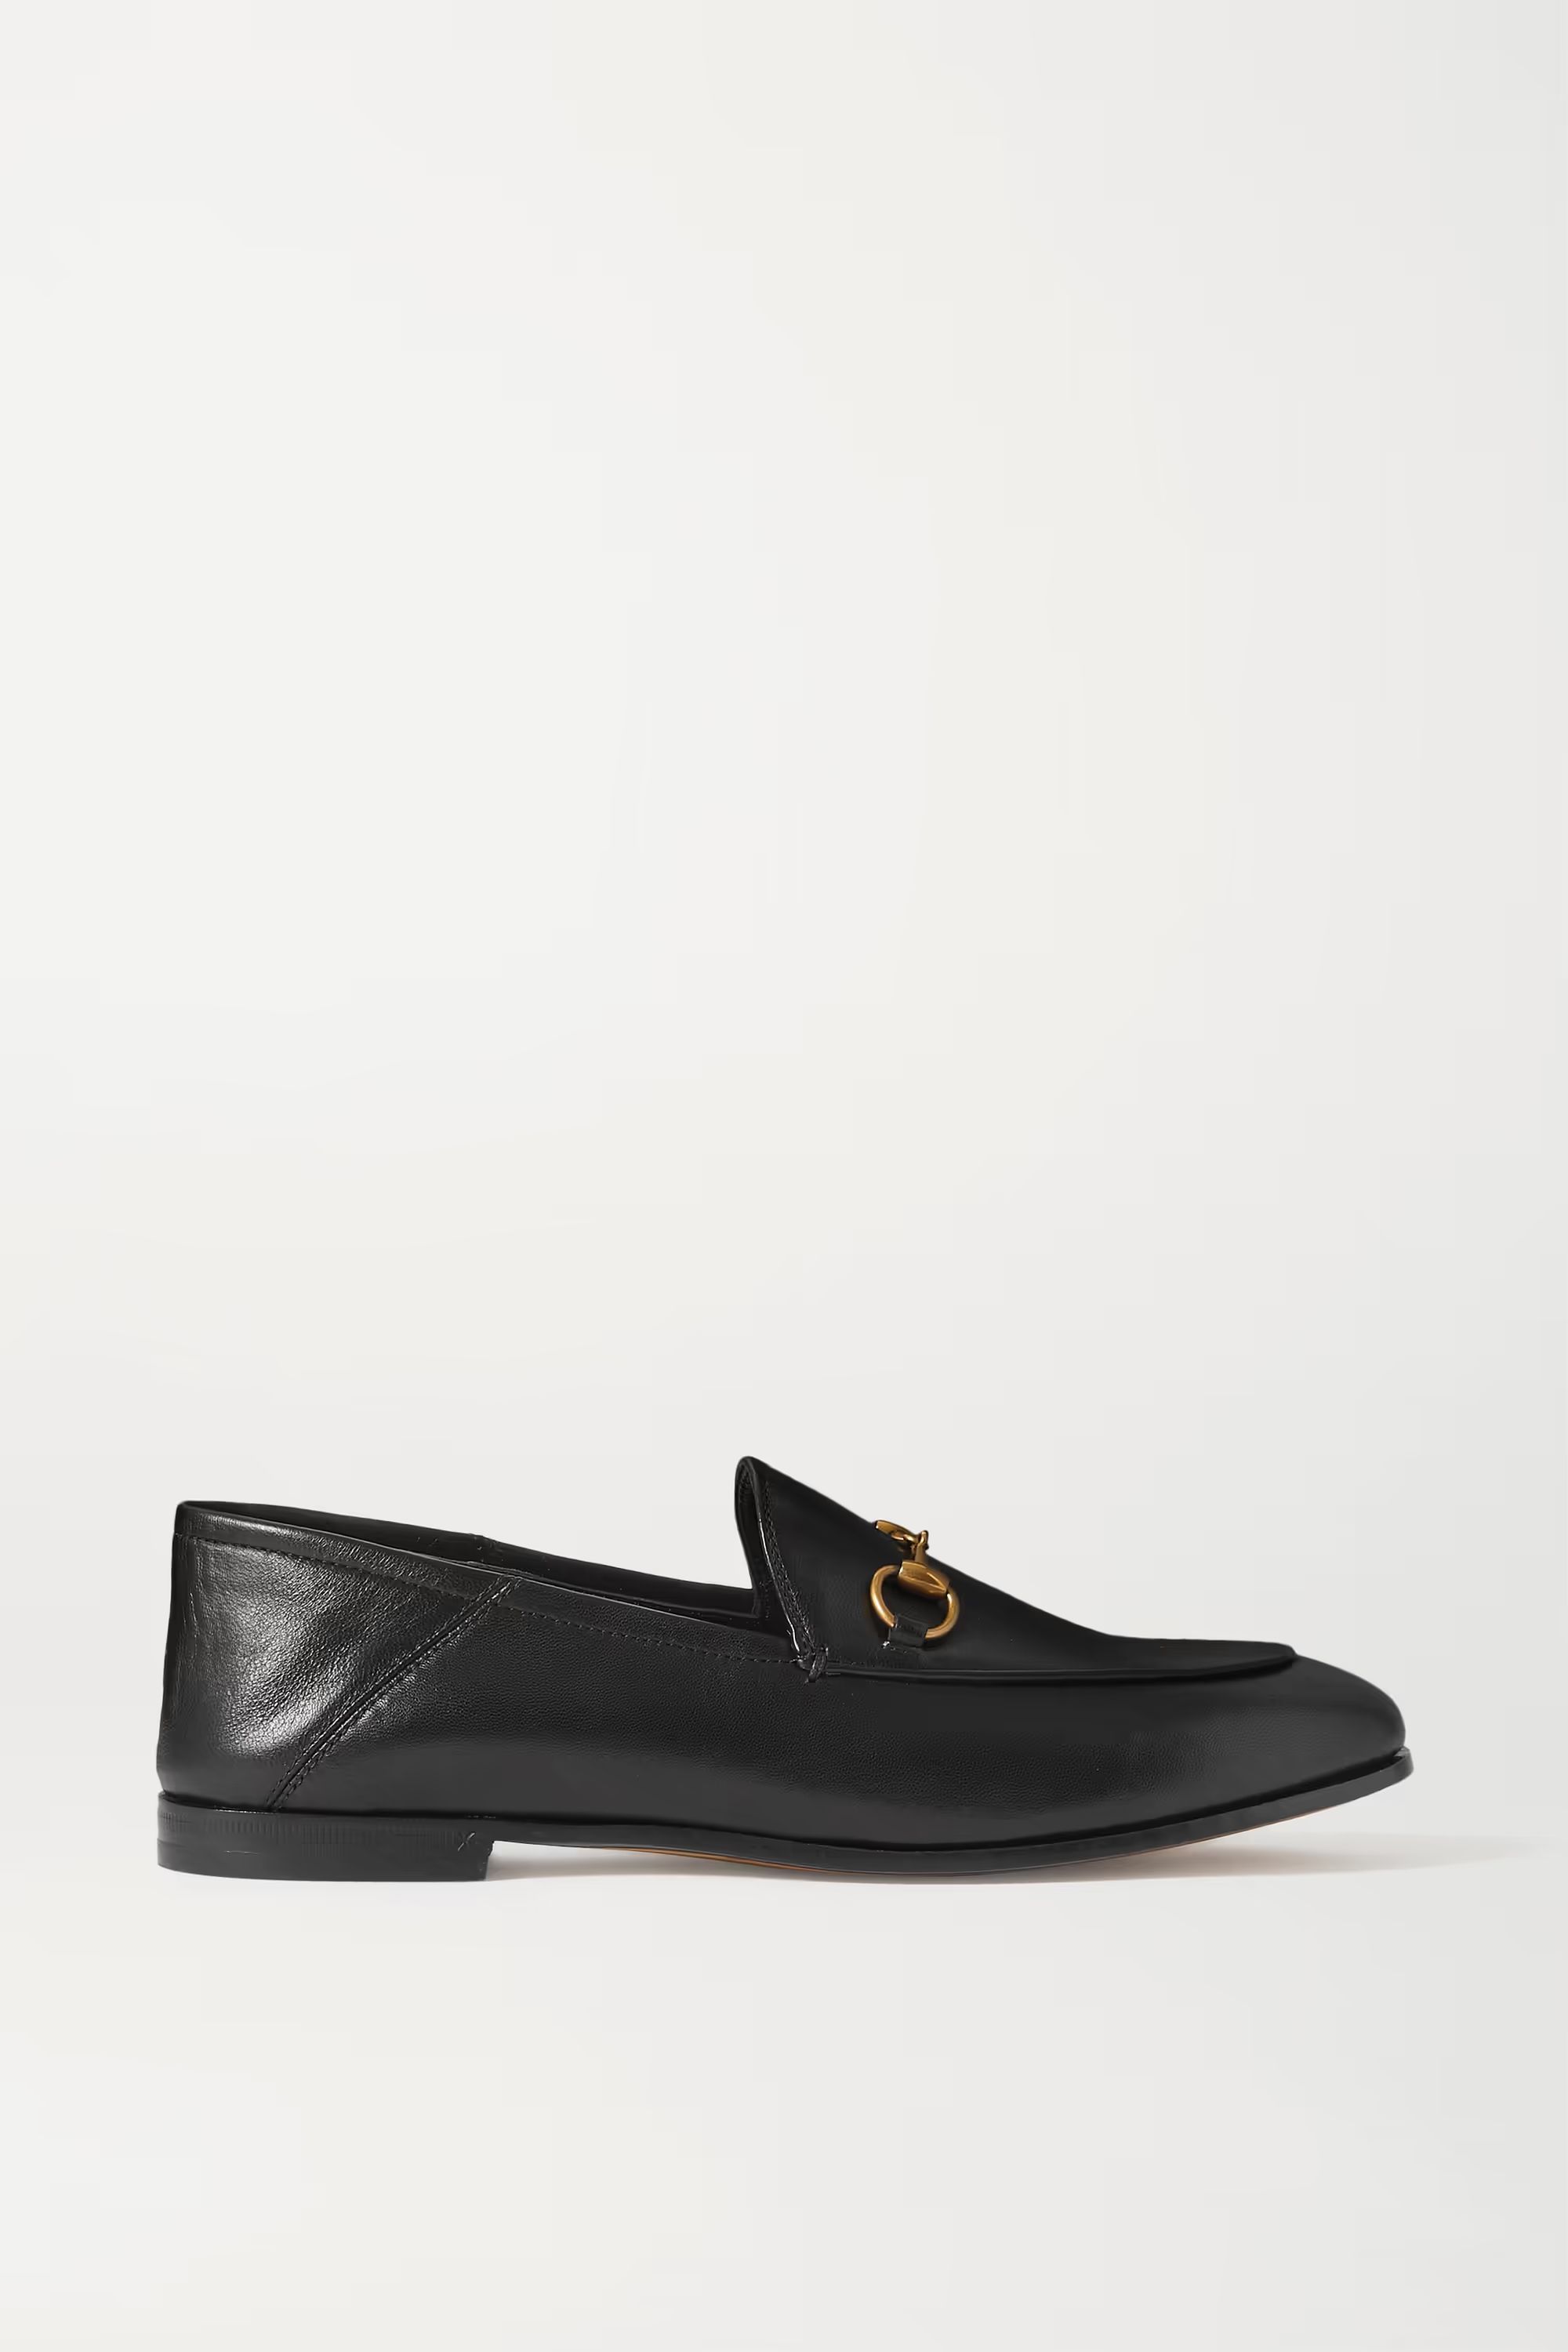 Black Brixton horsebit-detailed leather collapsible-heel loafers | GUCCI | NET-A-PORTER | NET-A-PORTER (US)